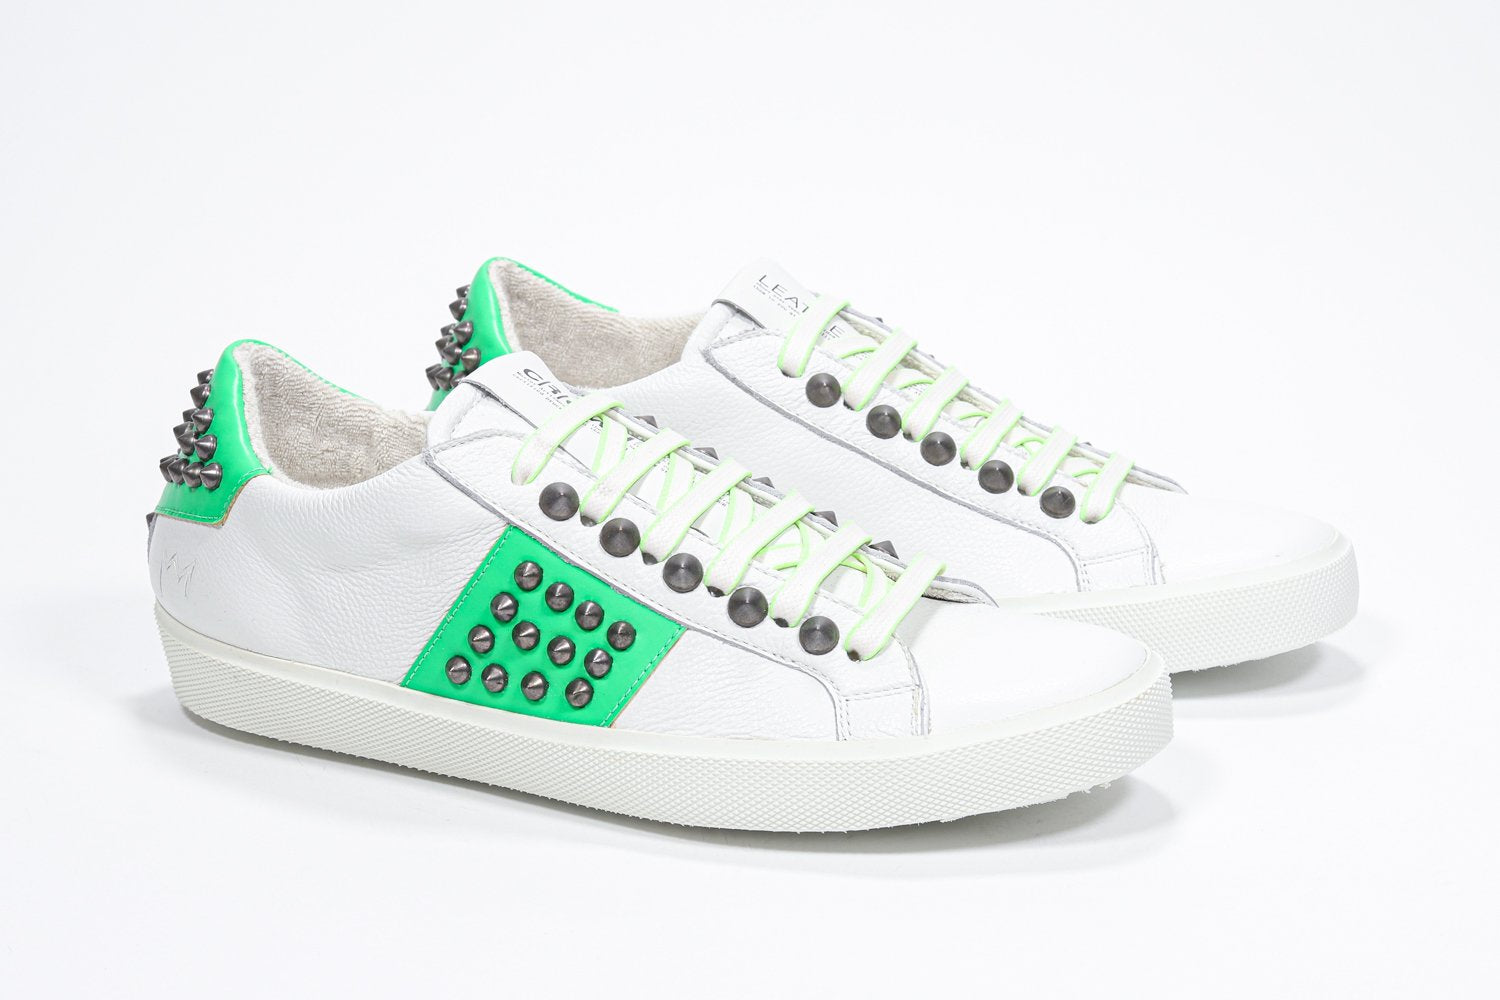 Three quarter front view of low top white and neon green sneaker. Full leather upper with studs and white rubber sole.